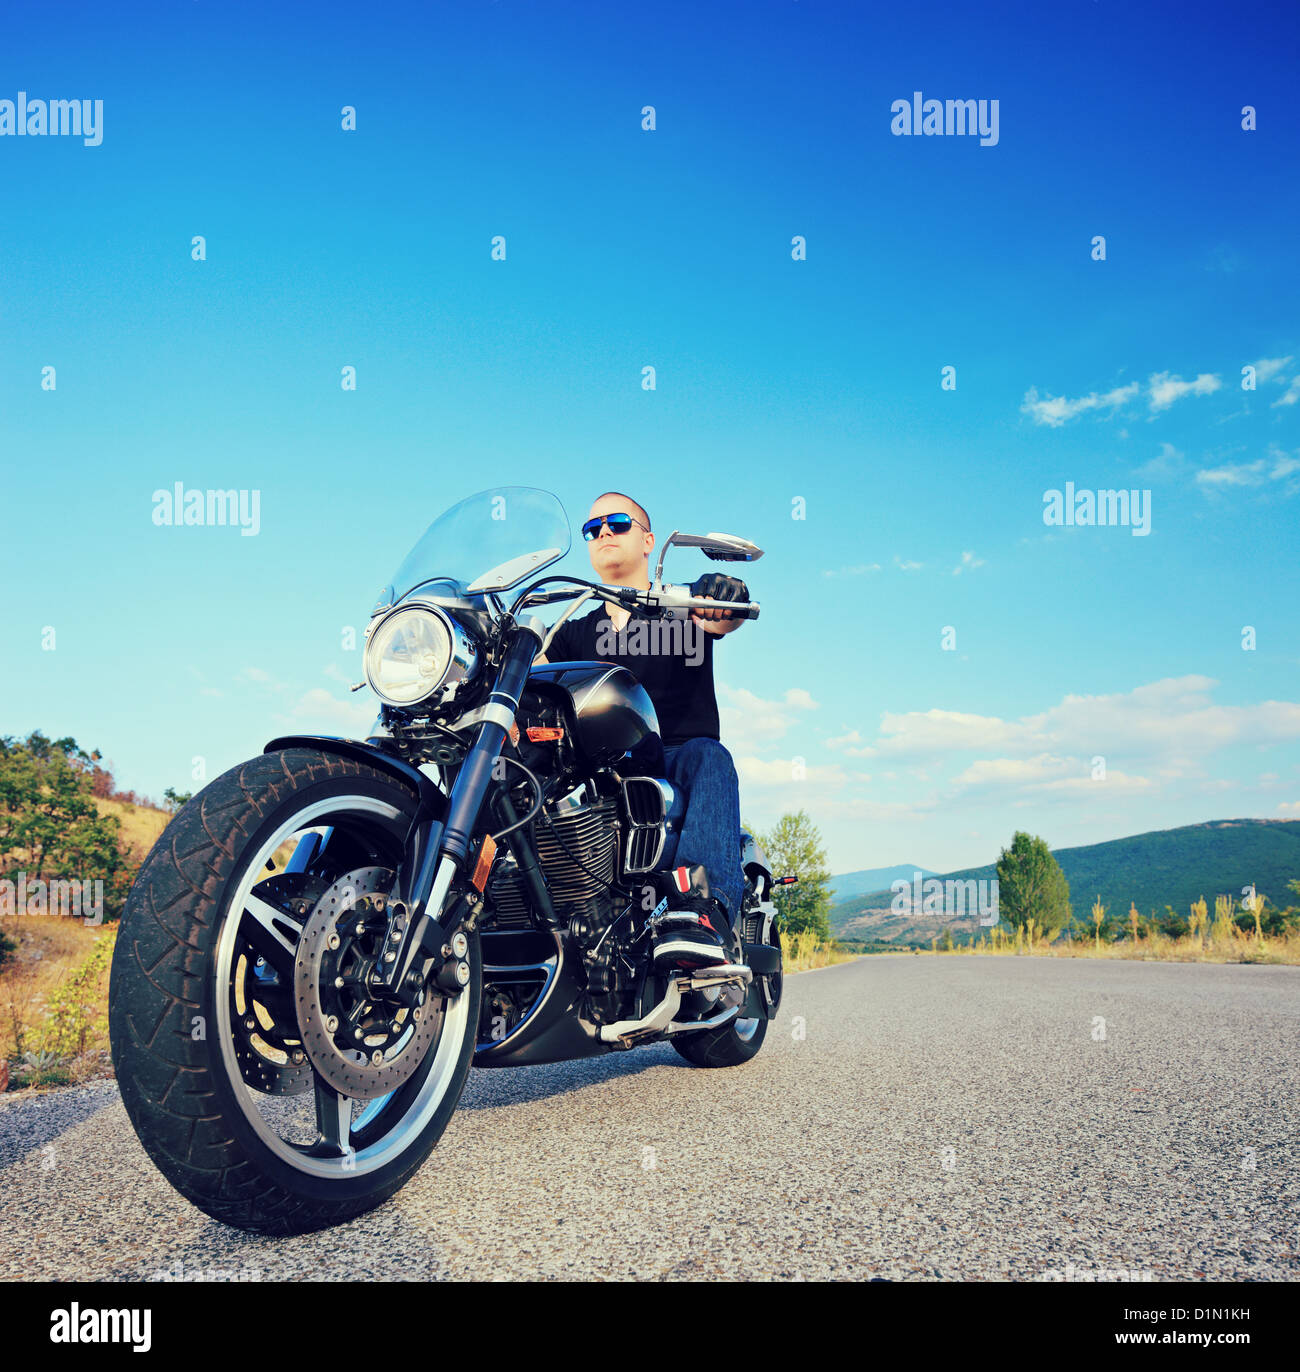 A biker riding a customized motorcycle on an open road, shot with a tilt and shift lens Stock Photo